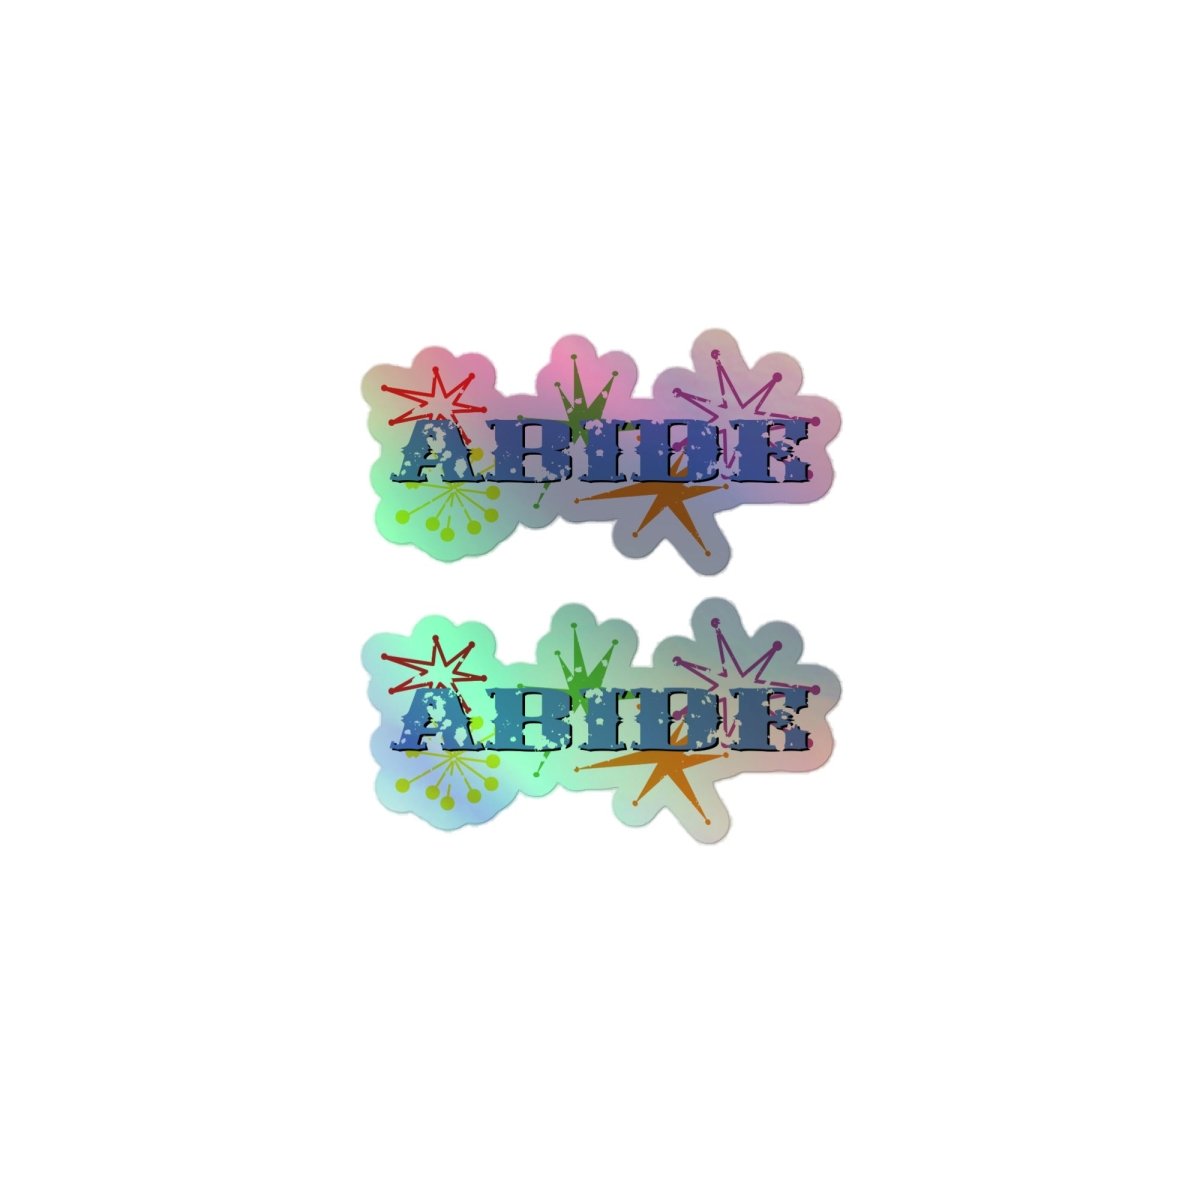 Abide Design Holographic stickers - The Dude Abides - Sticker - abide - abide design - Abide The Dude